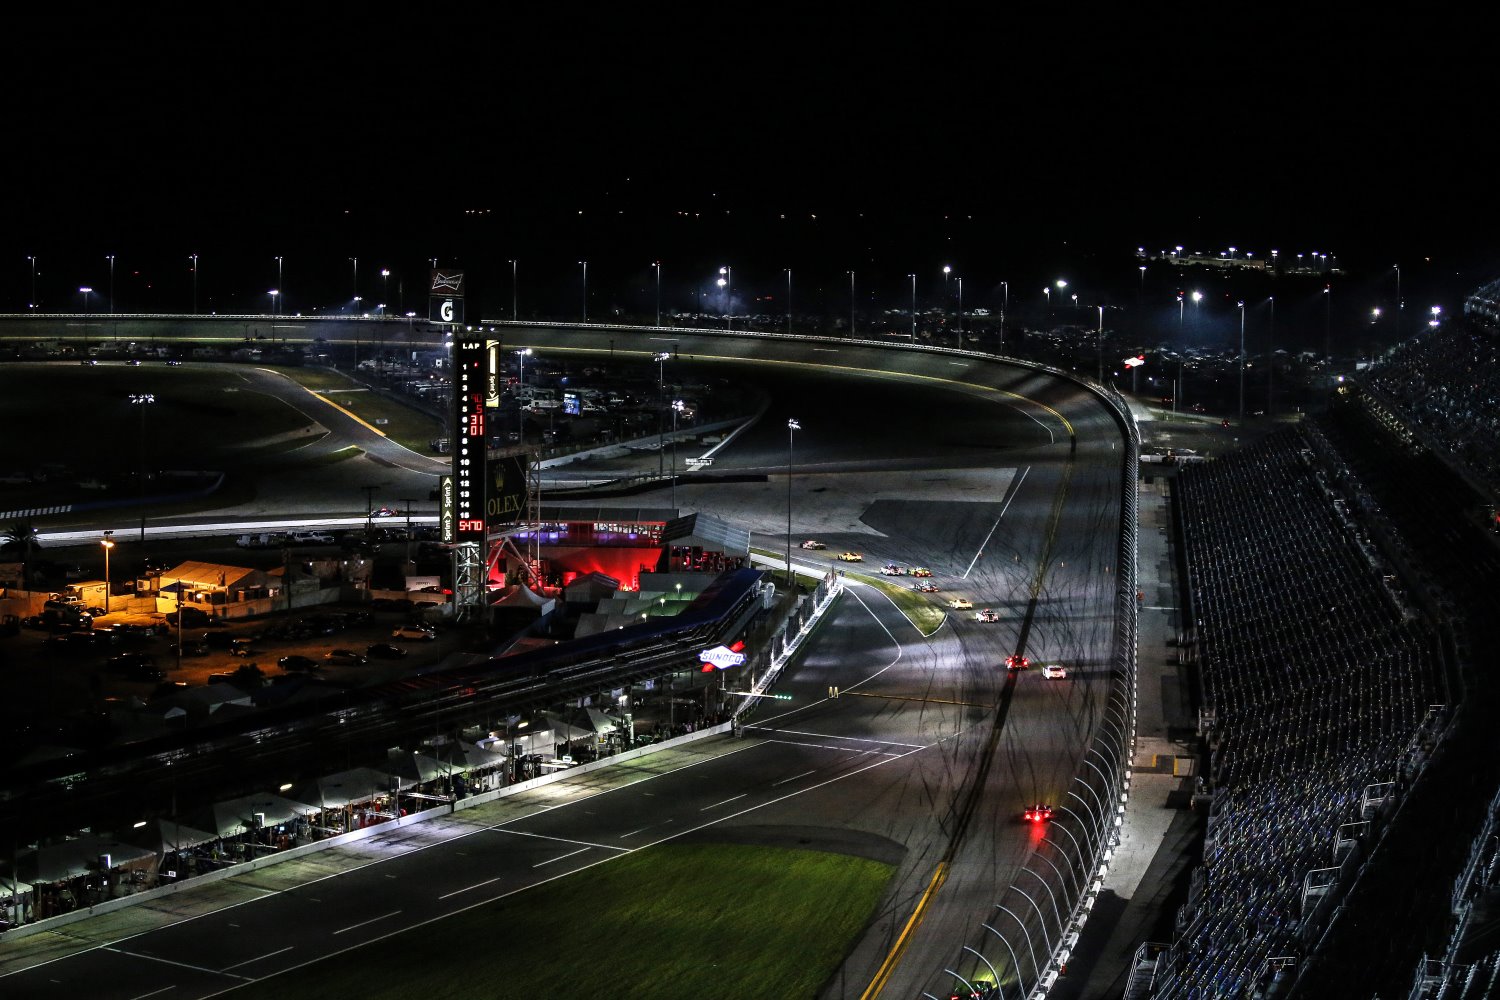 Nightime at the Rolex 24 